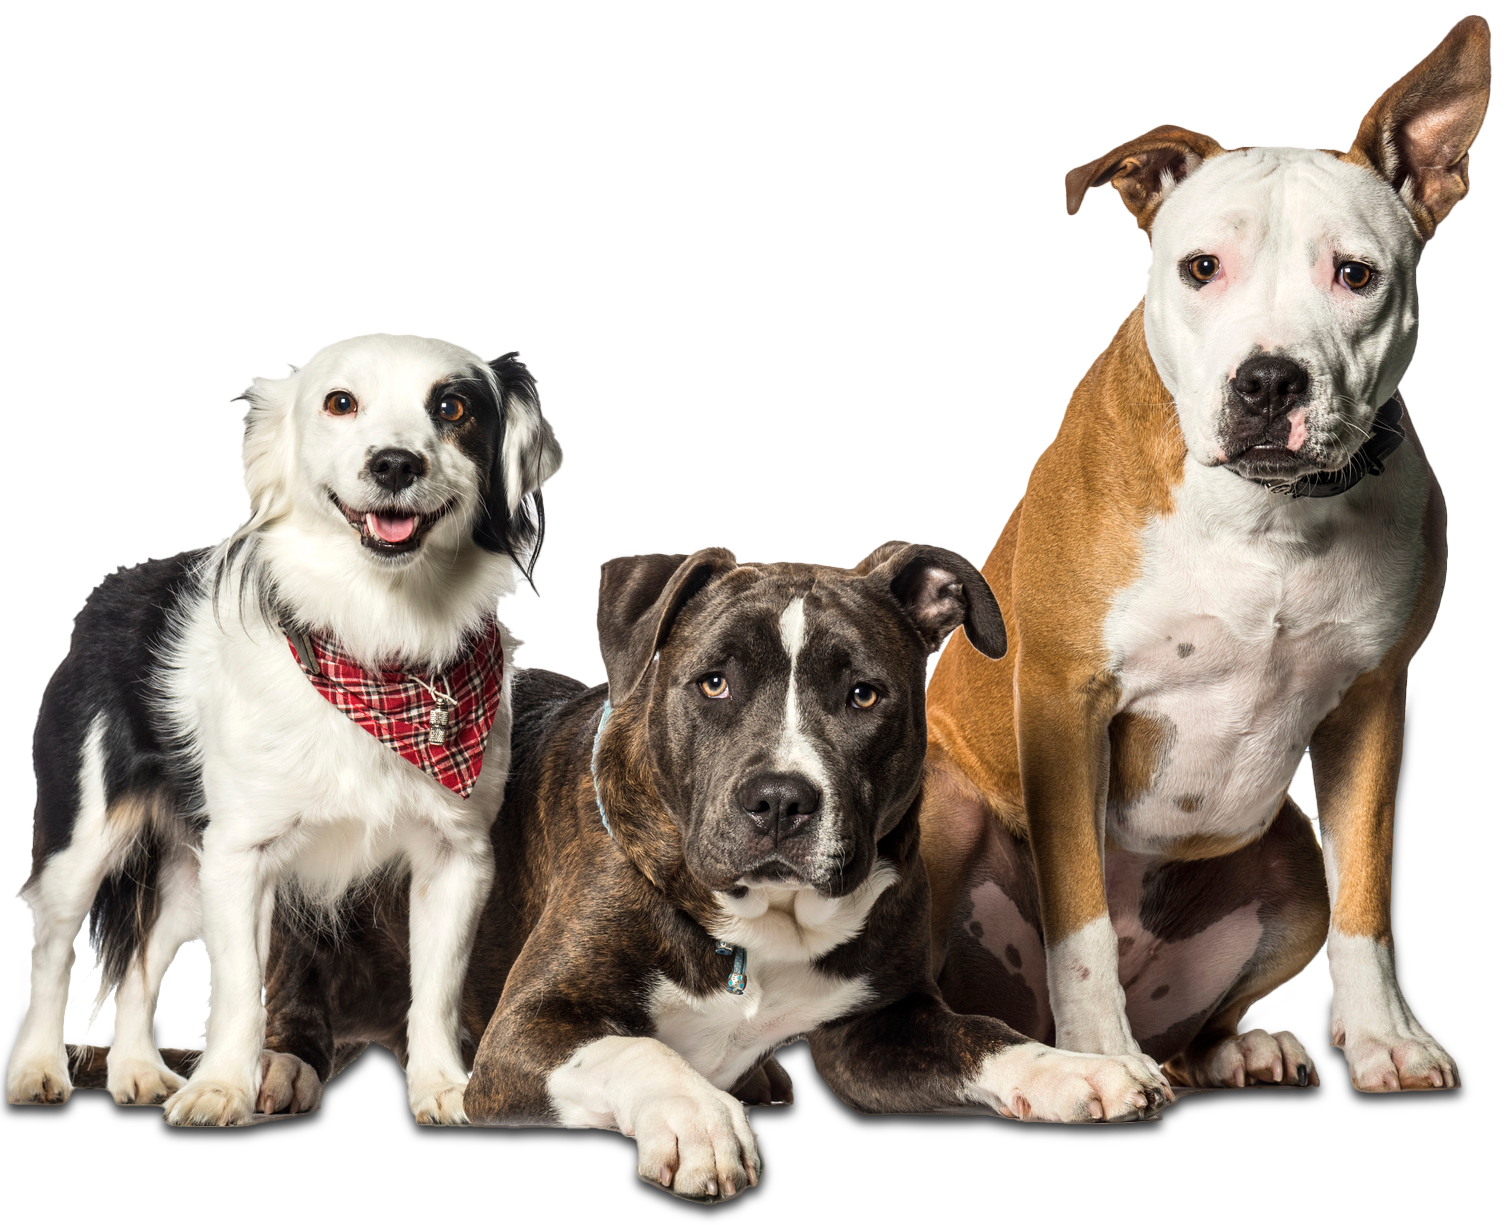 Three Dogs with Different Breeds - Riverview, MI - Riverview Animal Hospital